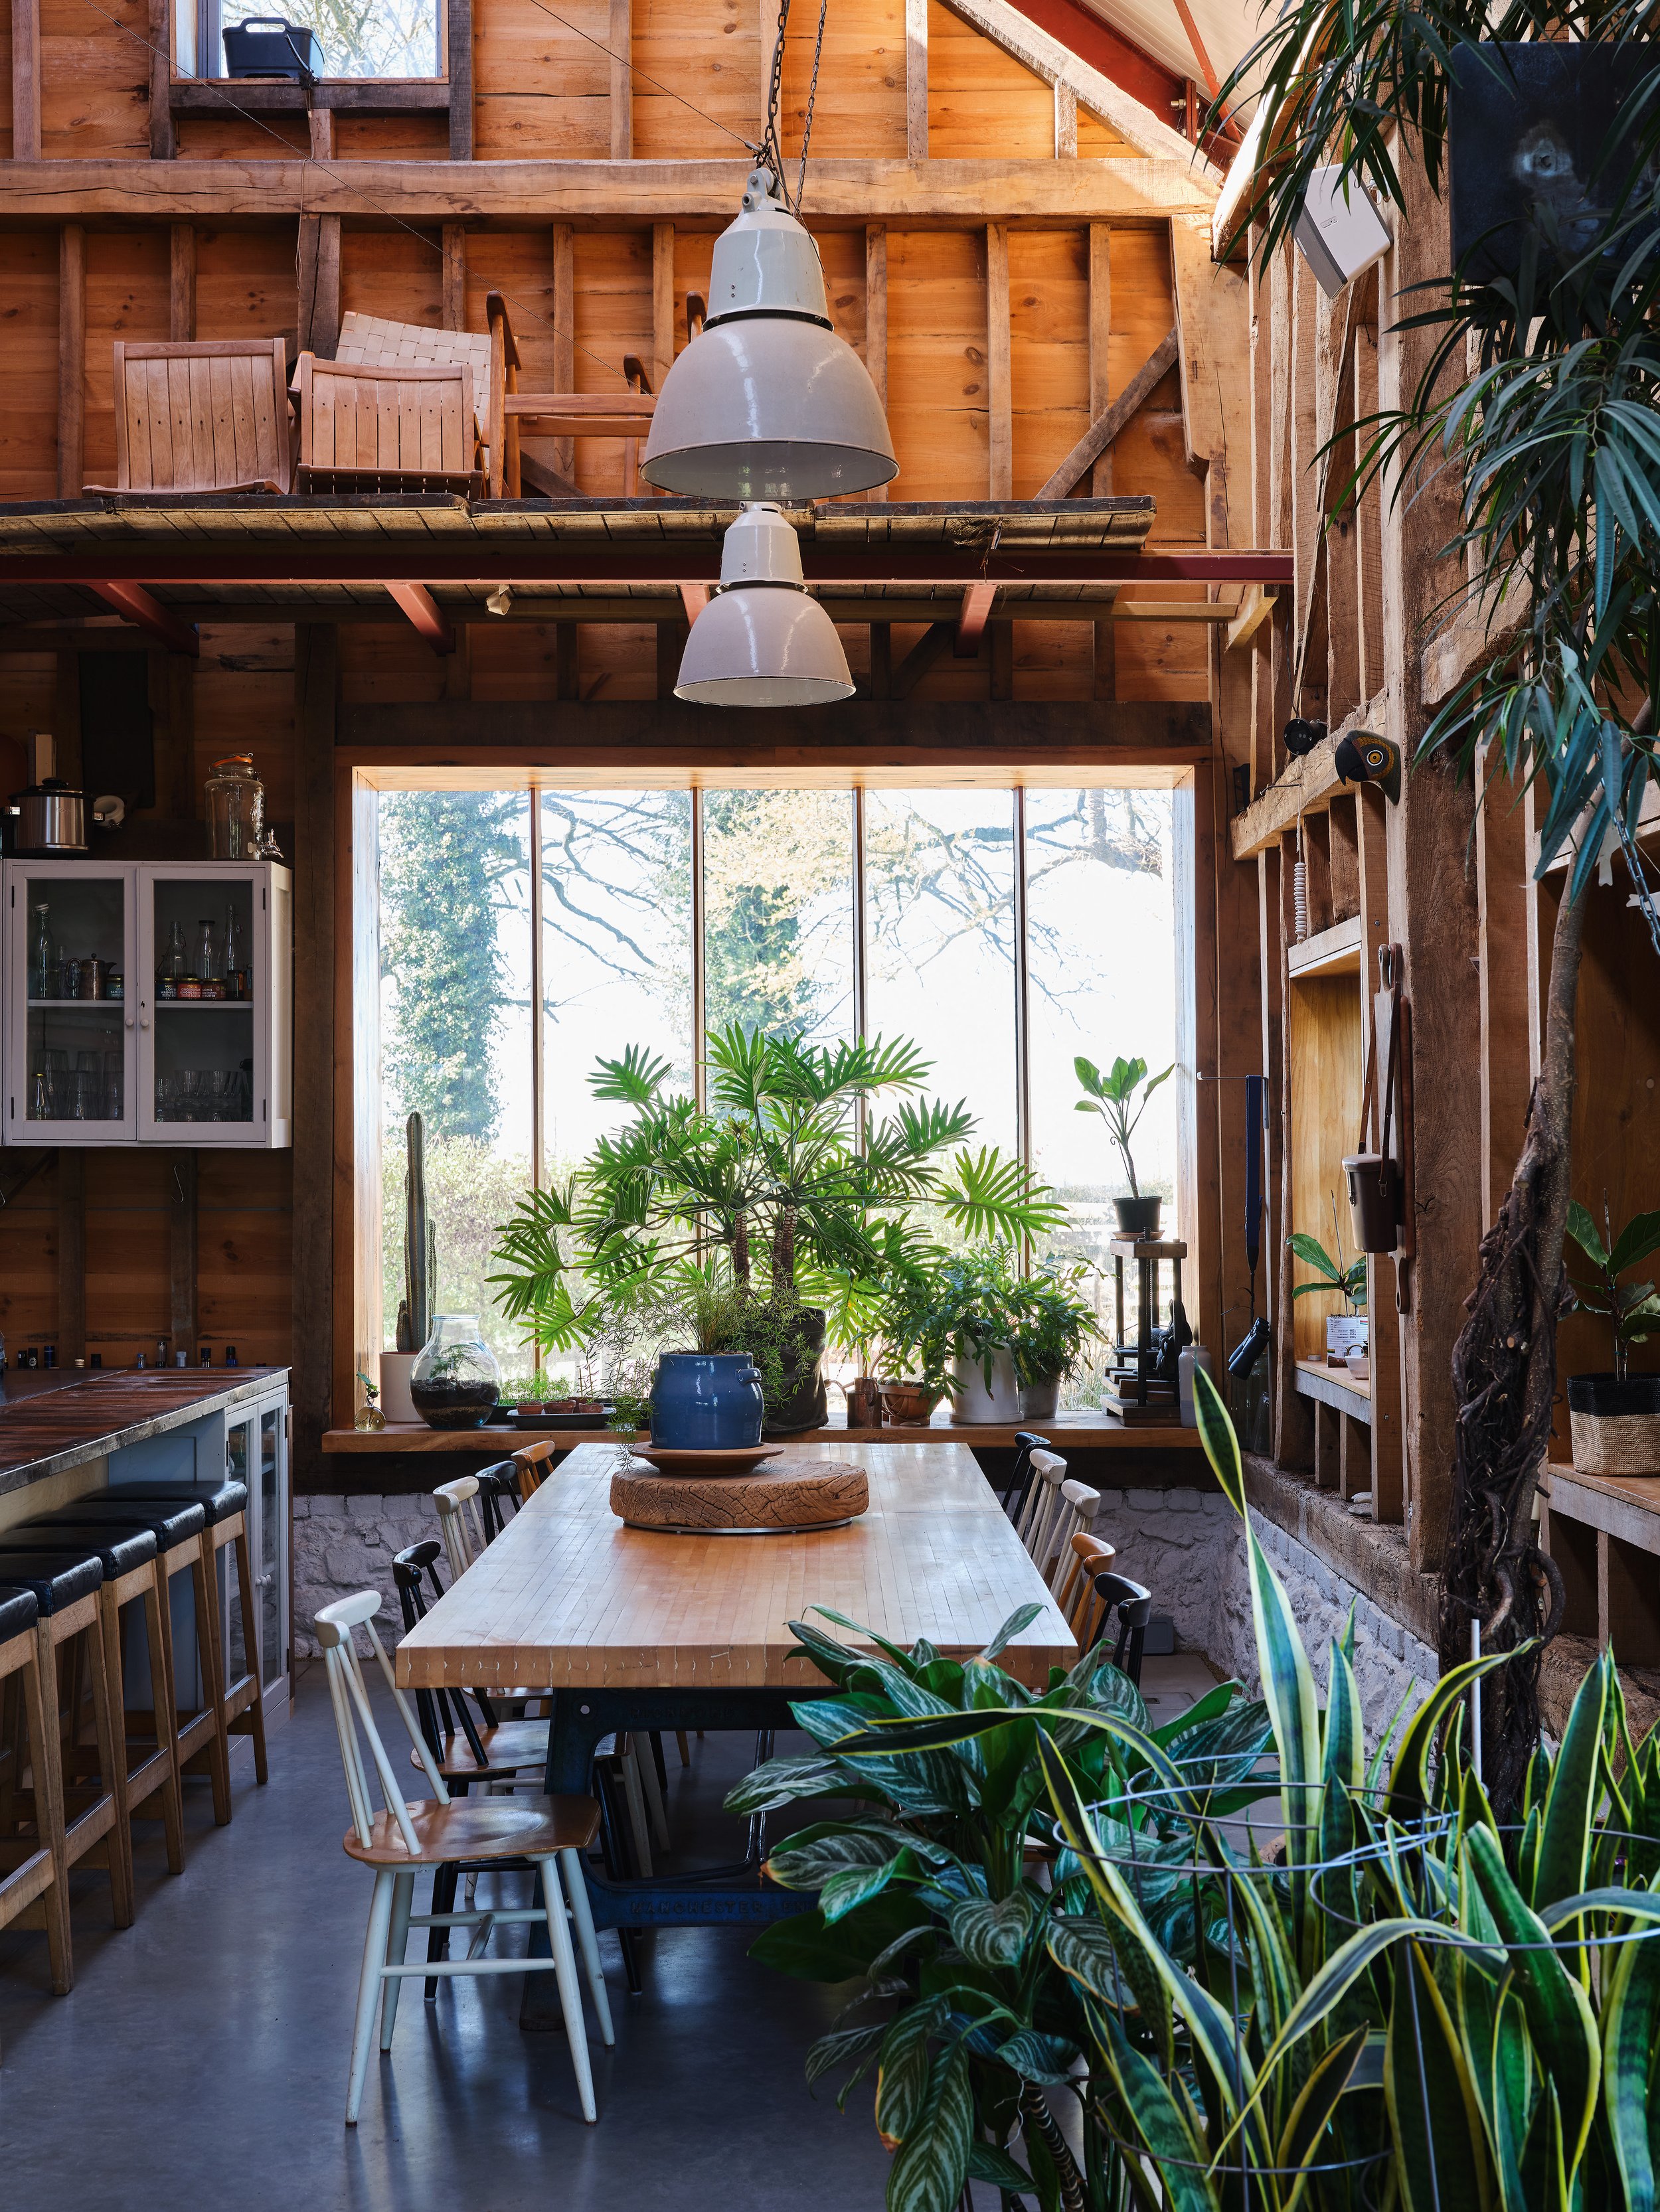 Double height interior with wood panelling and lots of plants